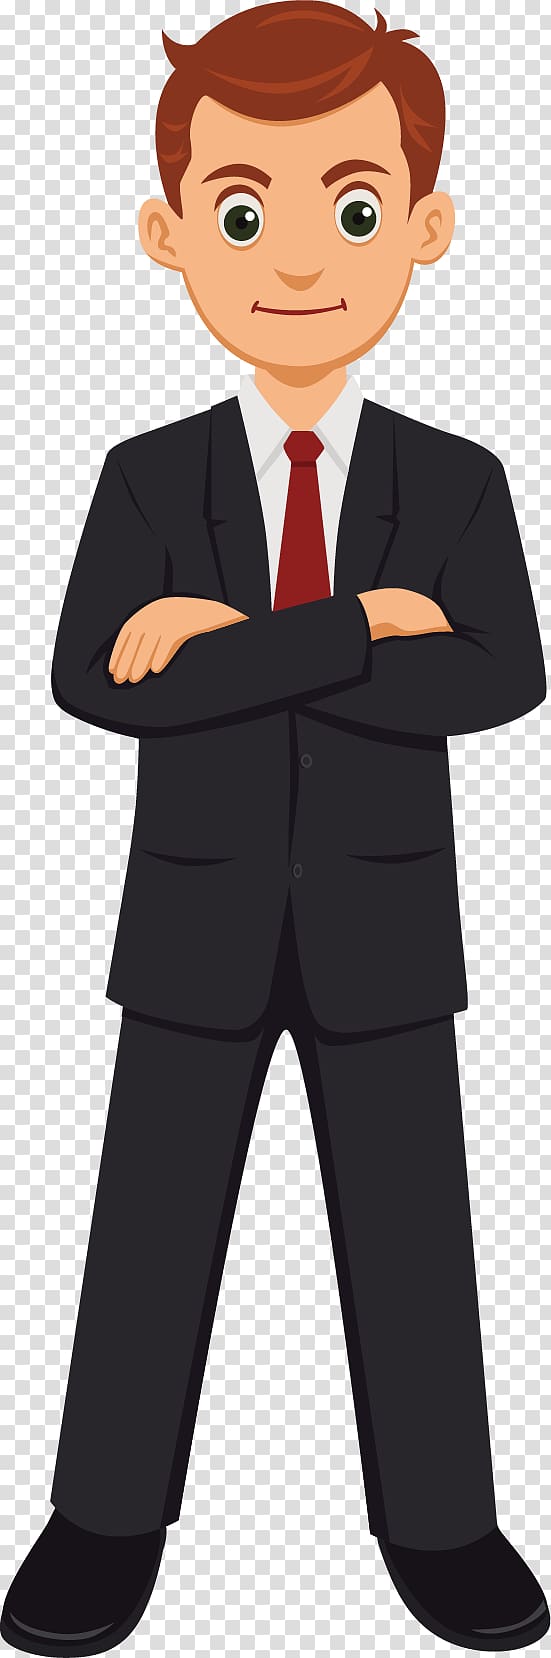 man wearing black suit and red tie cartoon, Cartoon, business man transparent background PNG clipart